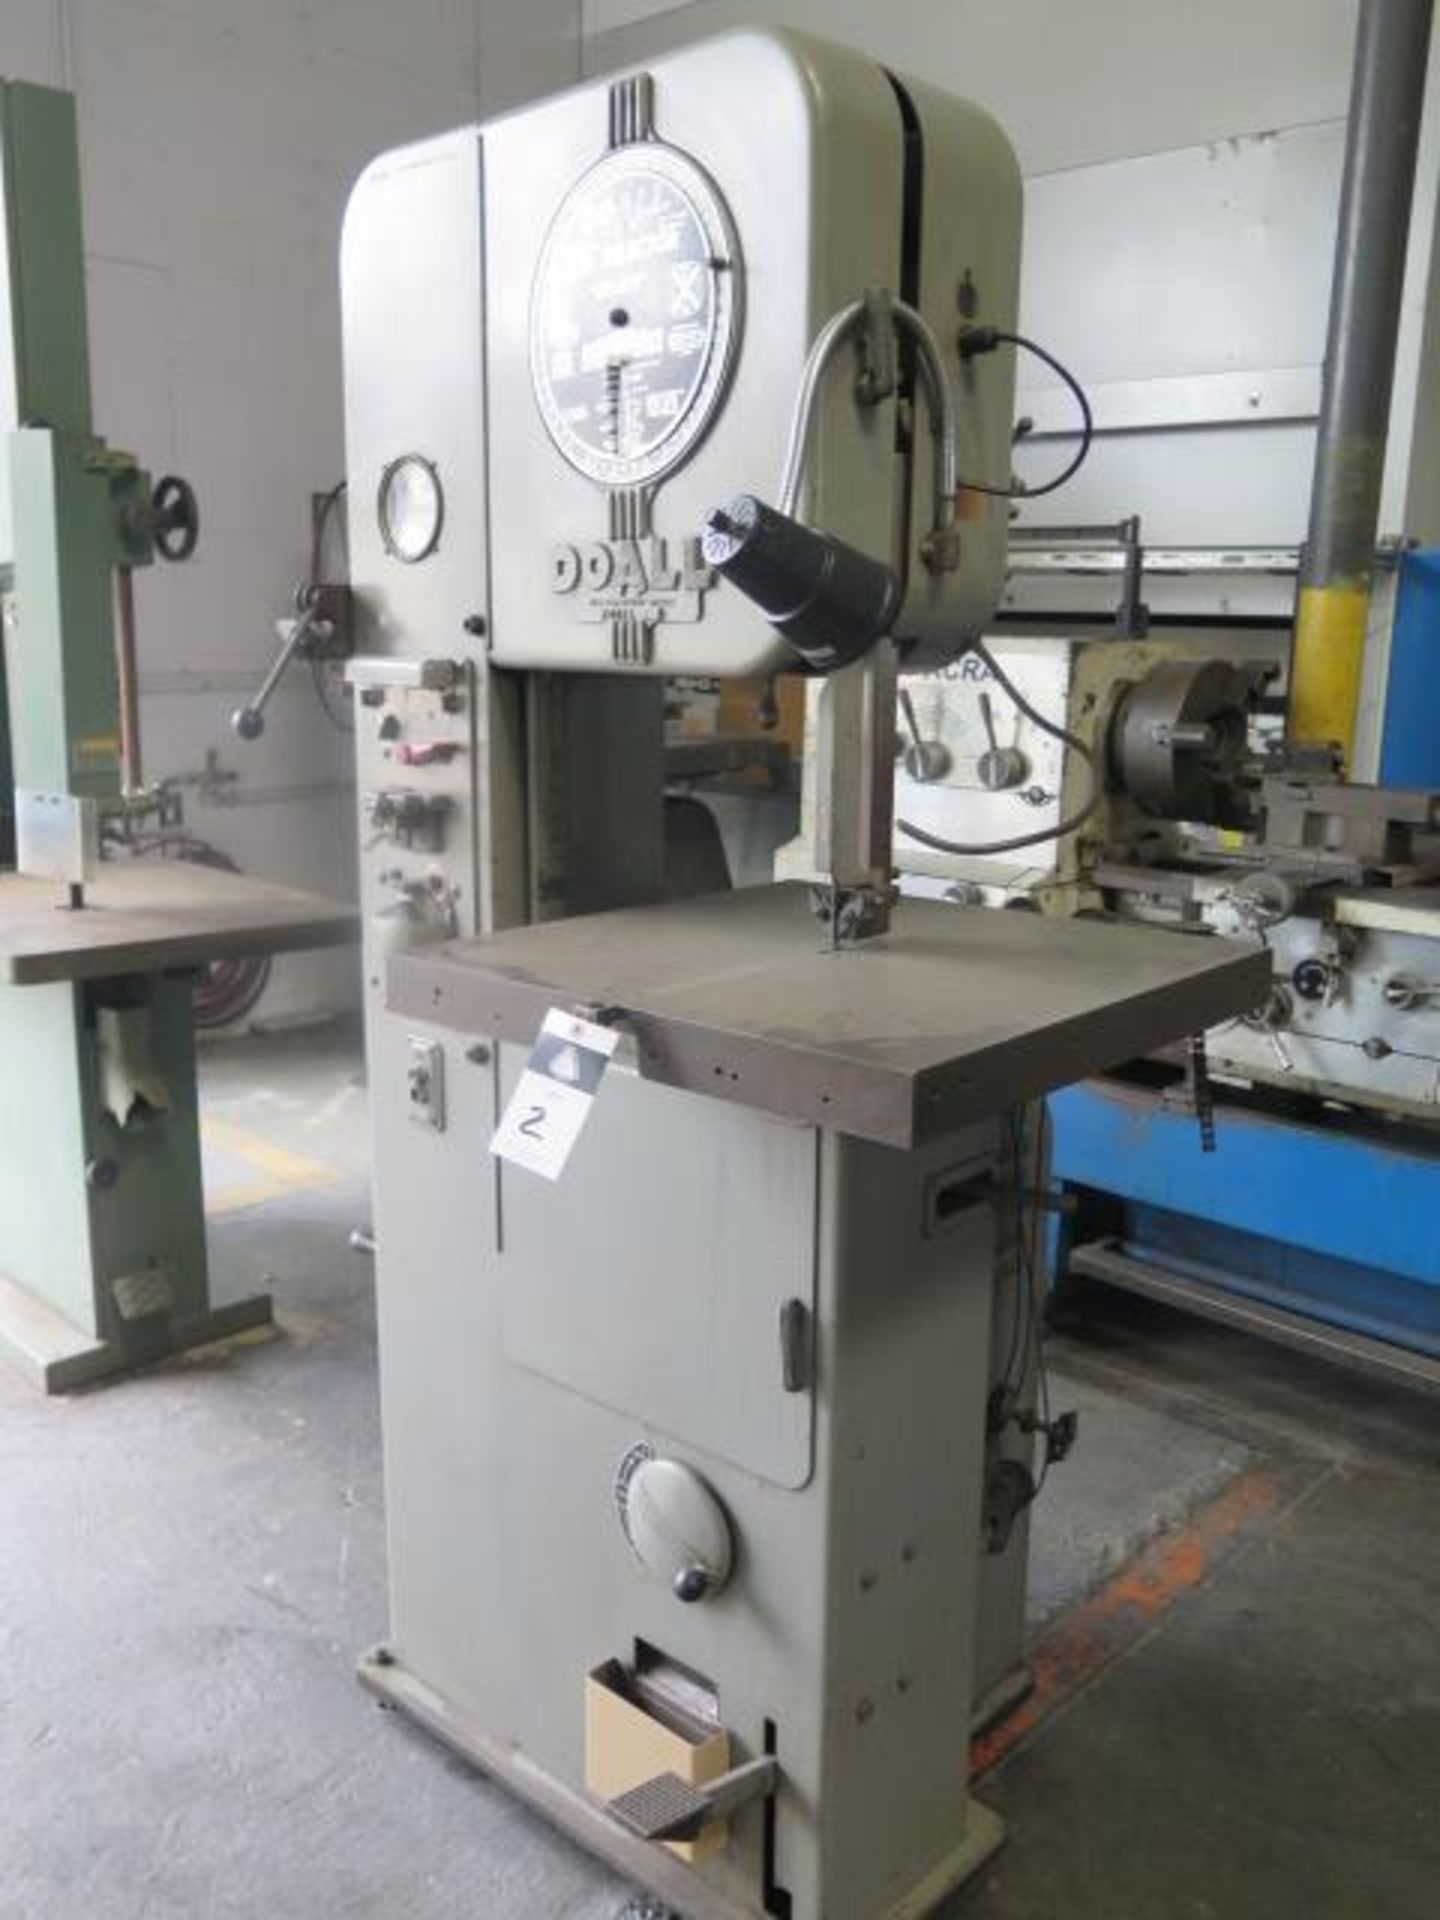 DoAll ML: 16” Vertical Band Saw s/n 5318133 w/ Blade Welder, 24” x 24” Table SOLD AS-IS - Image 2 of 9